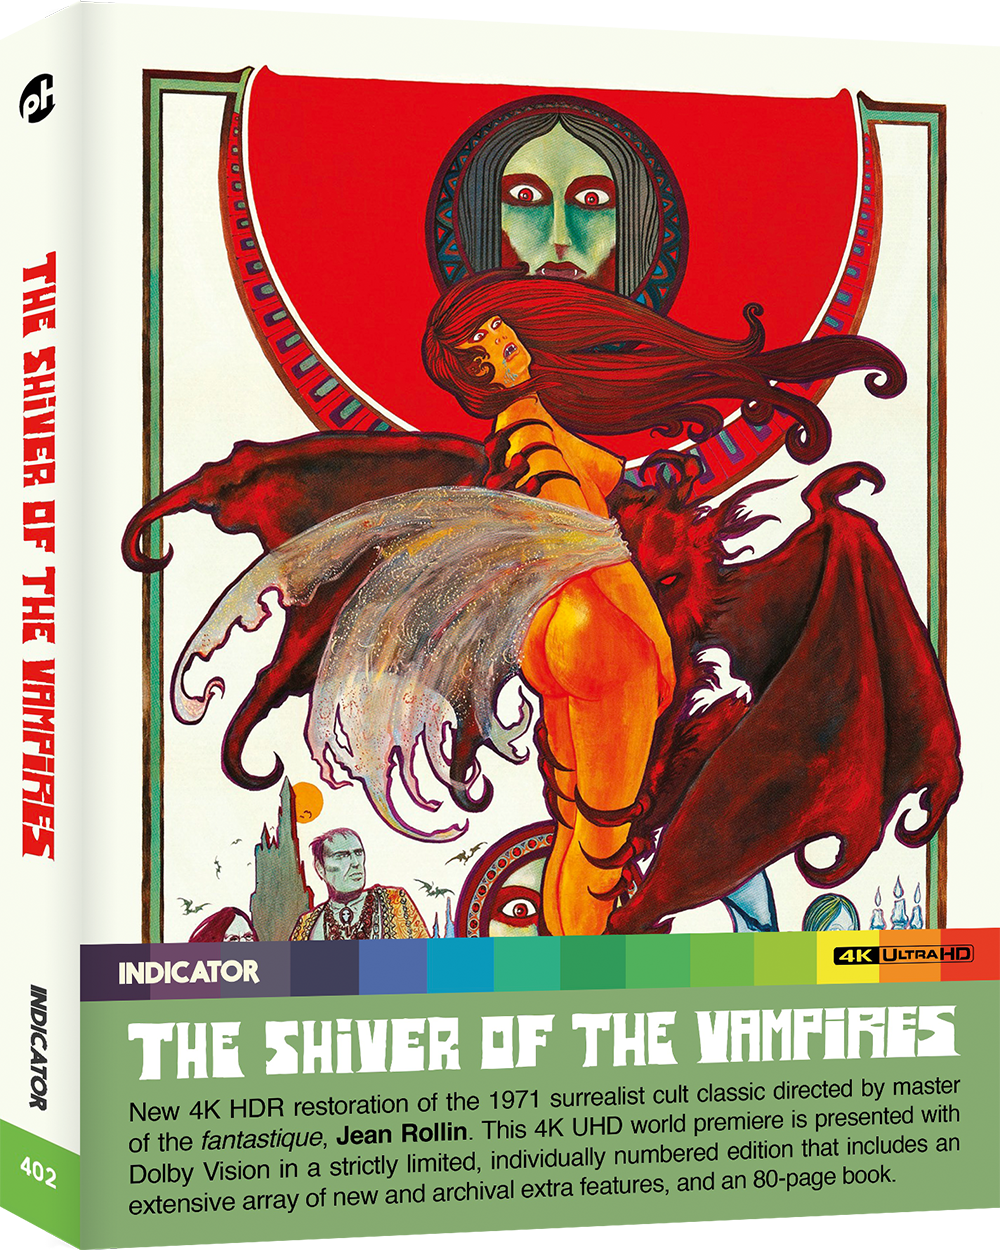 THE SHIVER OF THE VAMPIRES - 4K UHD LE [US]